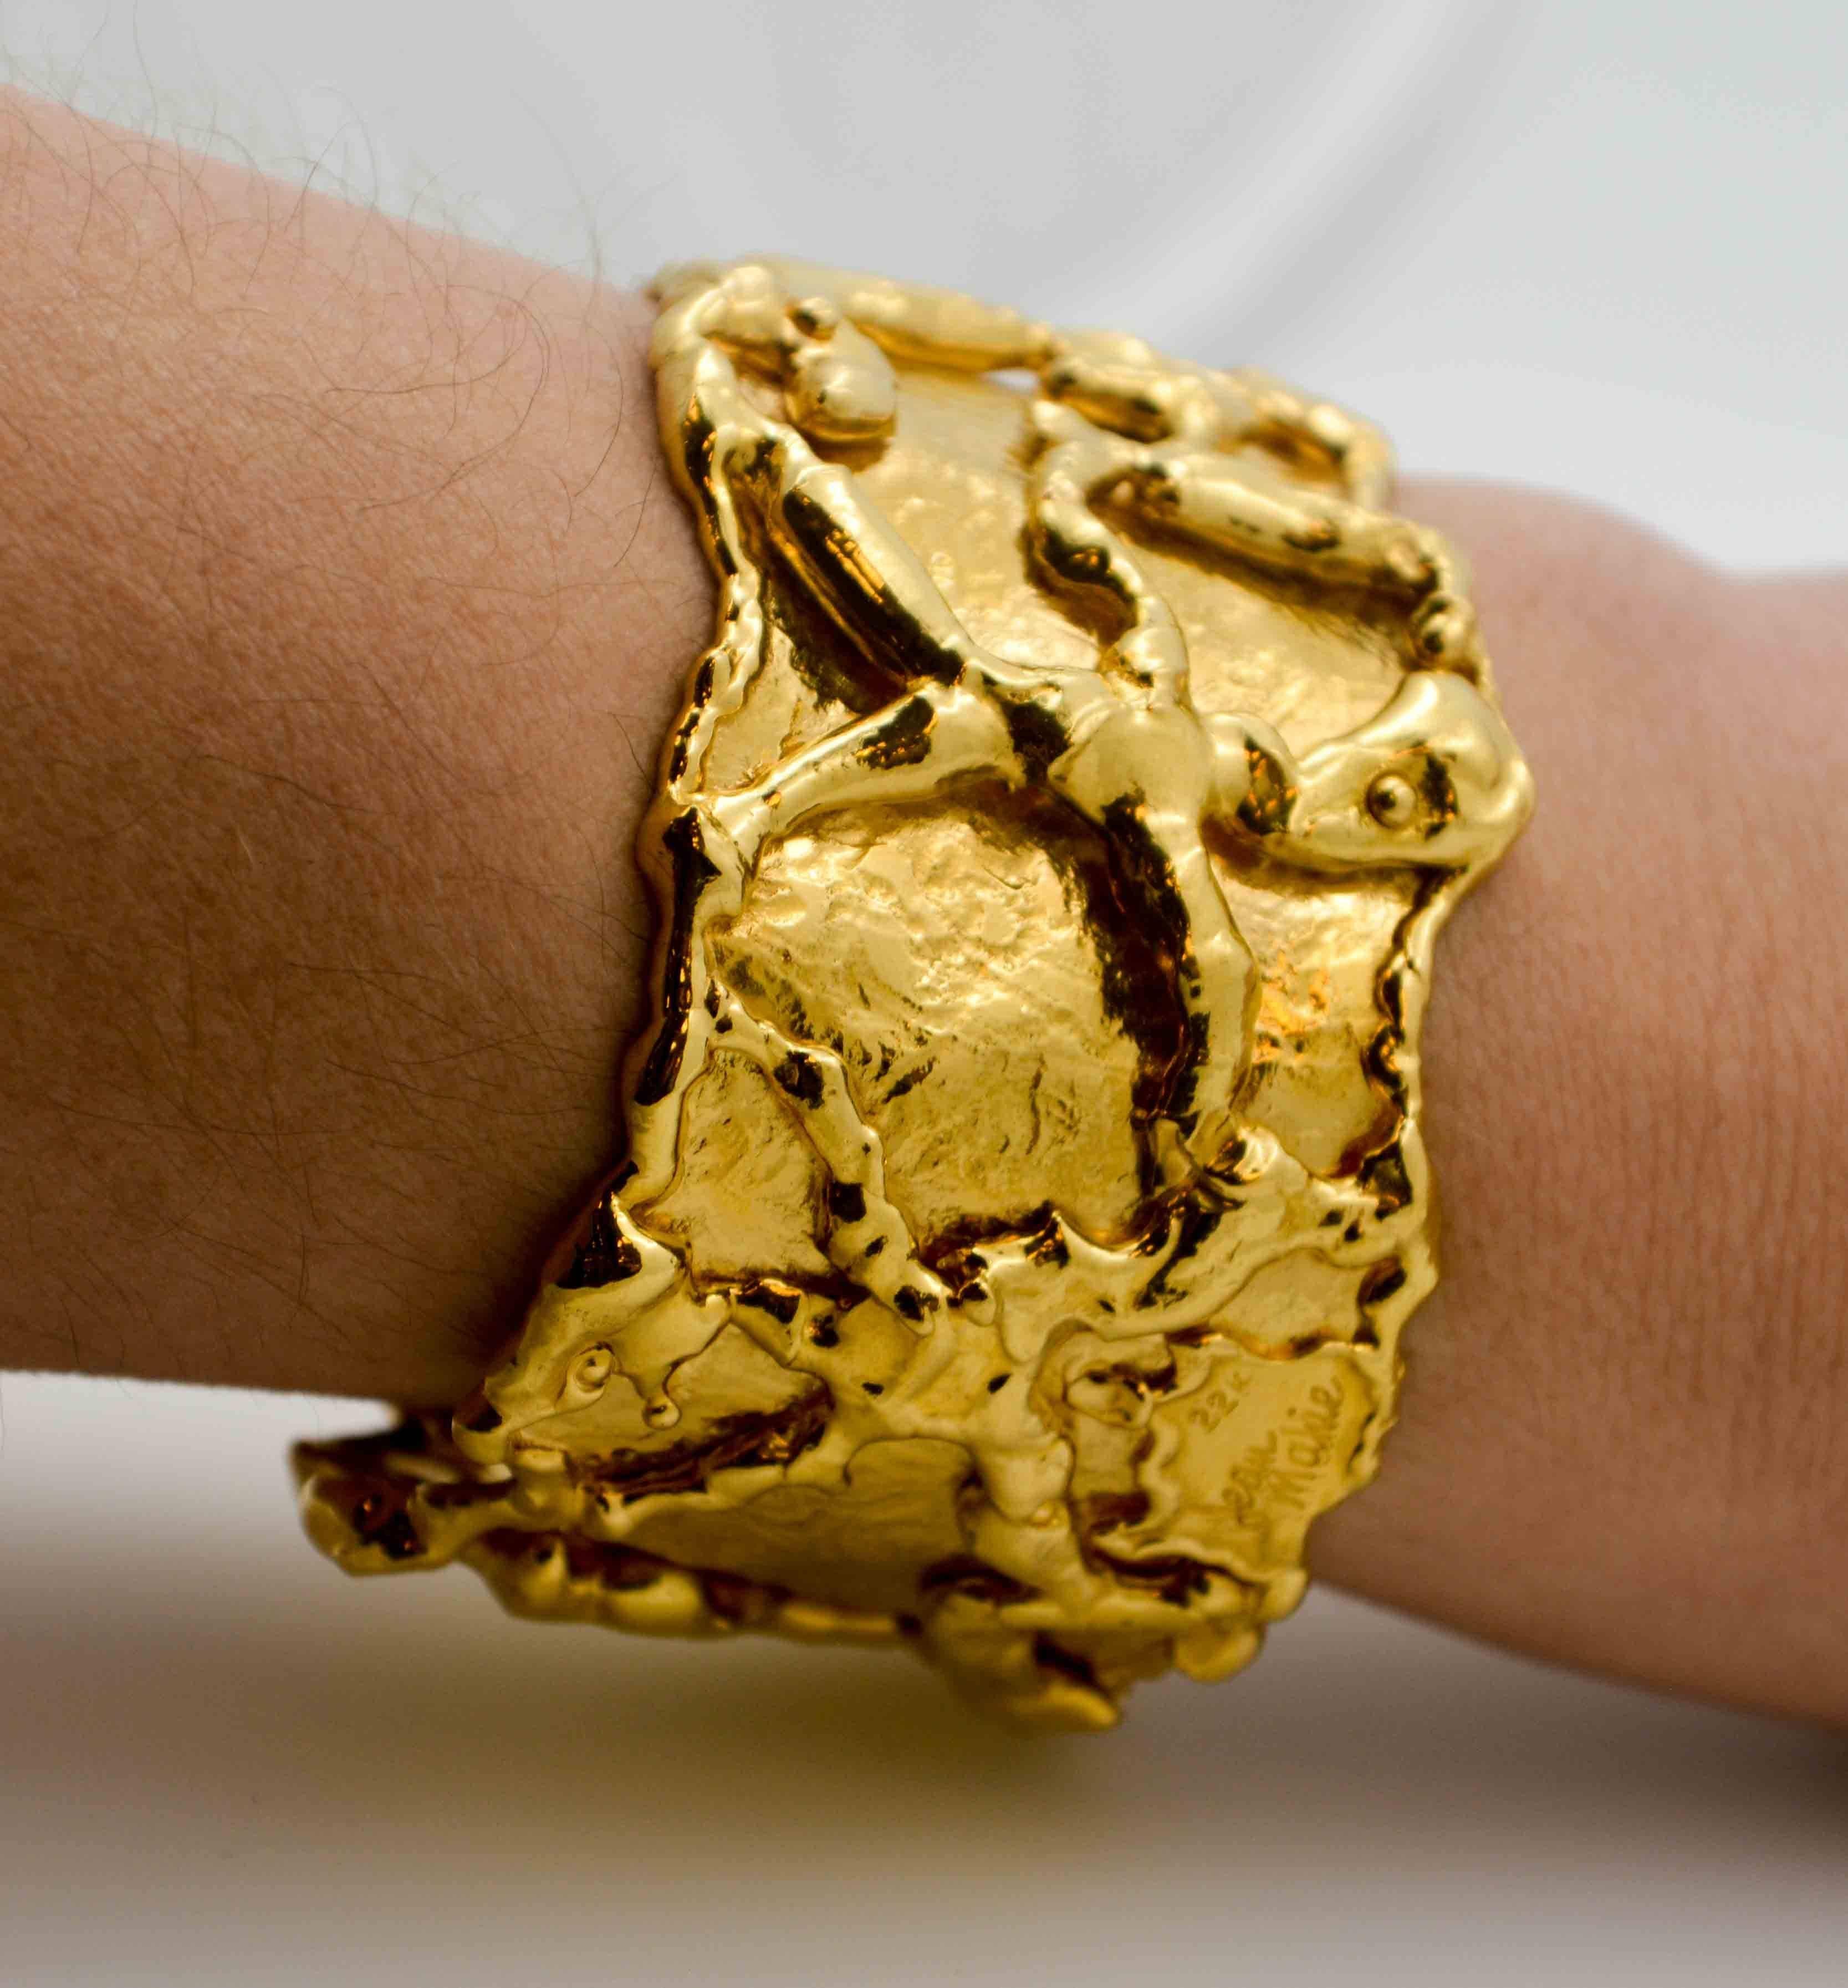 Mad about bold gold? With creative figures carved into this daring bold 22 kt yellow gold cuff bracelet, you'll dazzle with every move of your wrist. Jean Mahie created this dramatic 22 kt gold cuff bracelet to be worn with a flamboyant air. Go